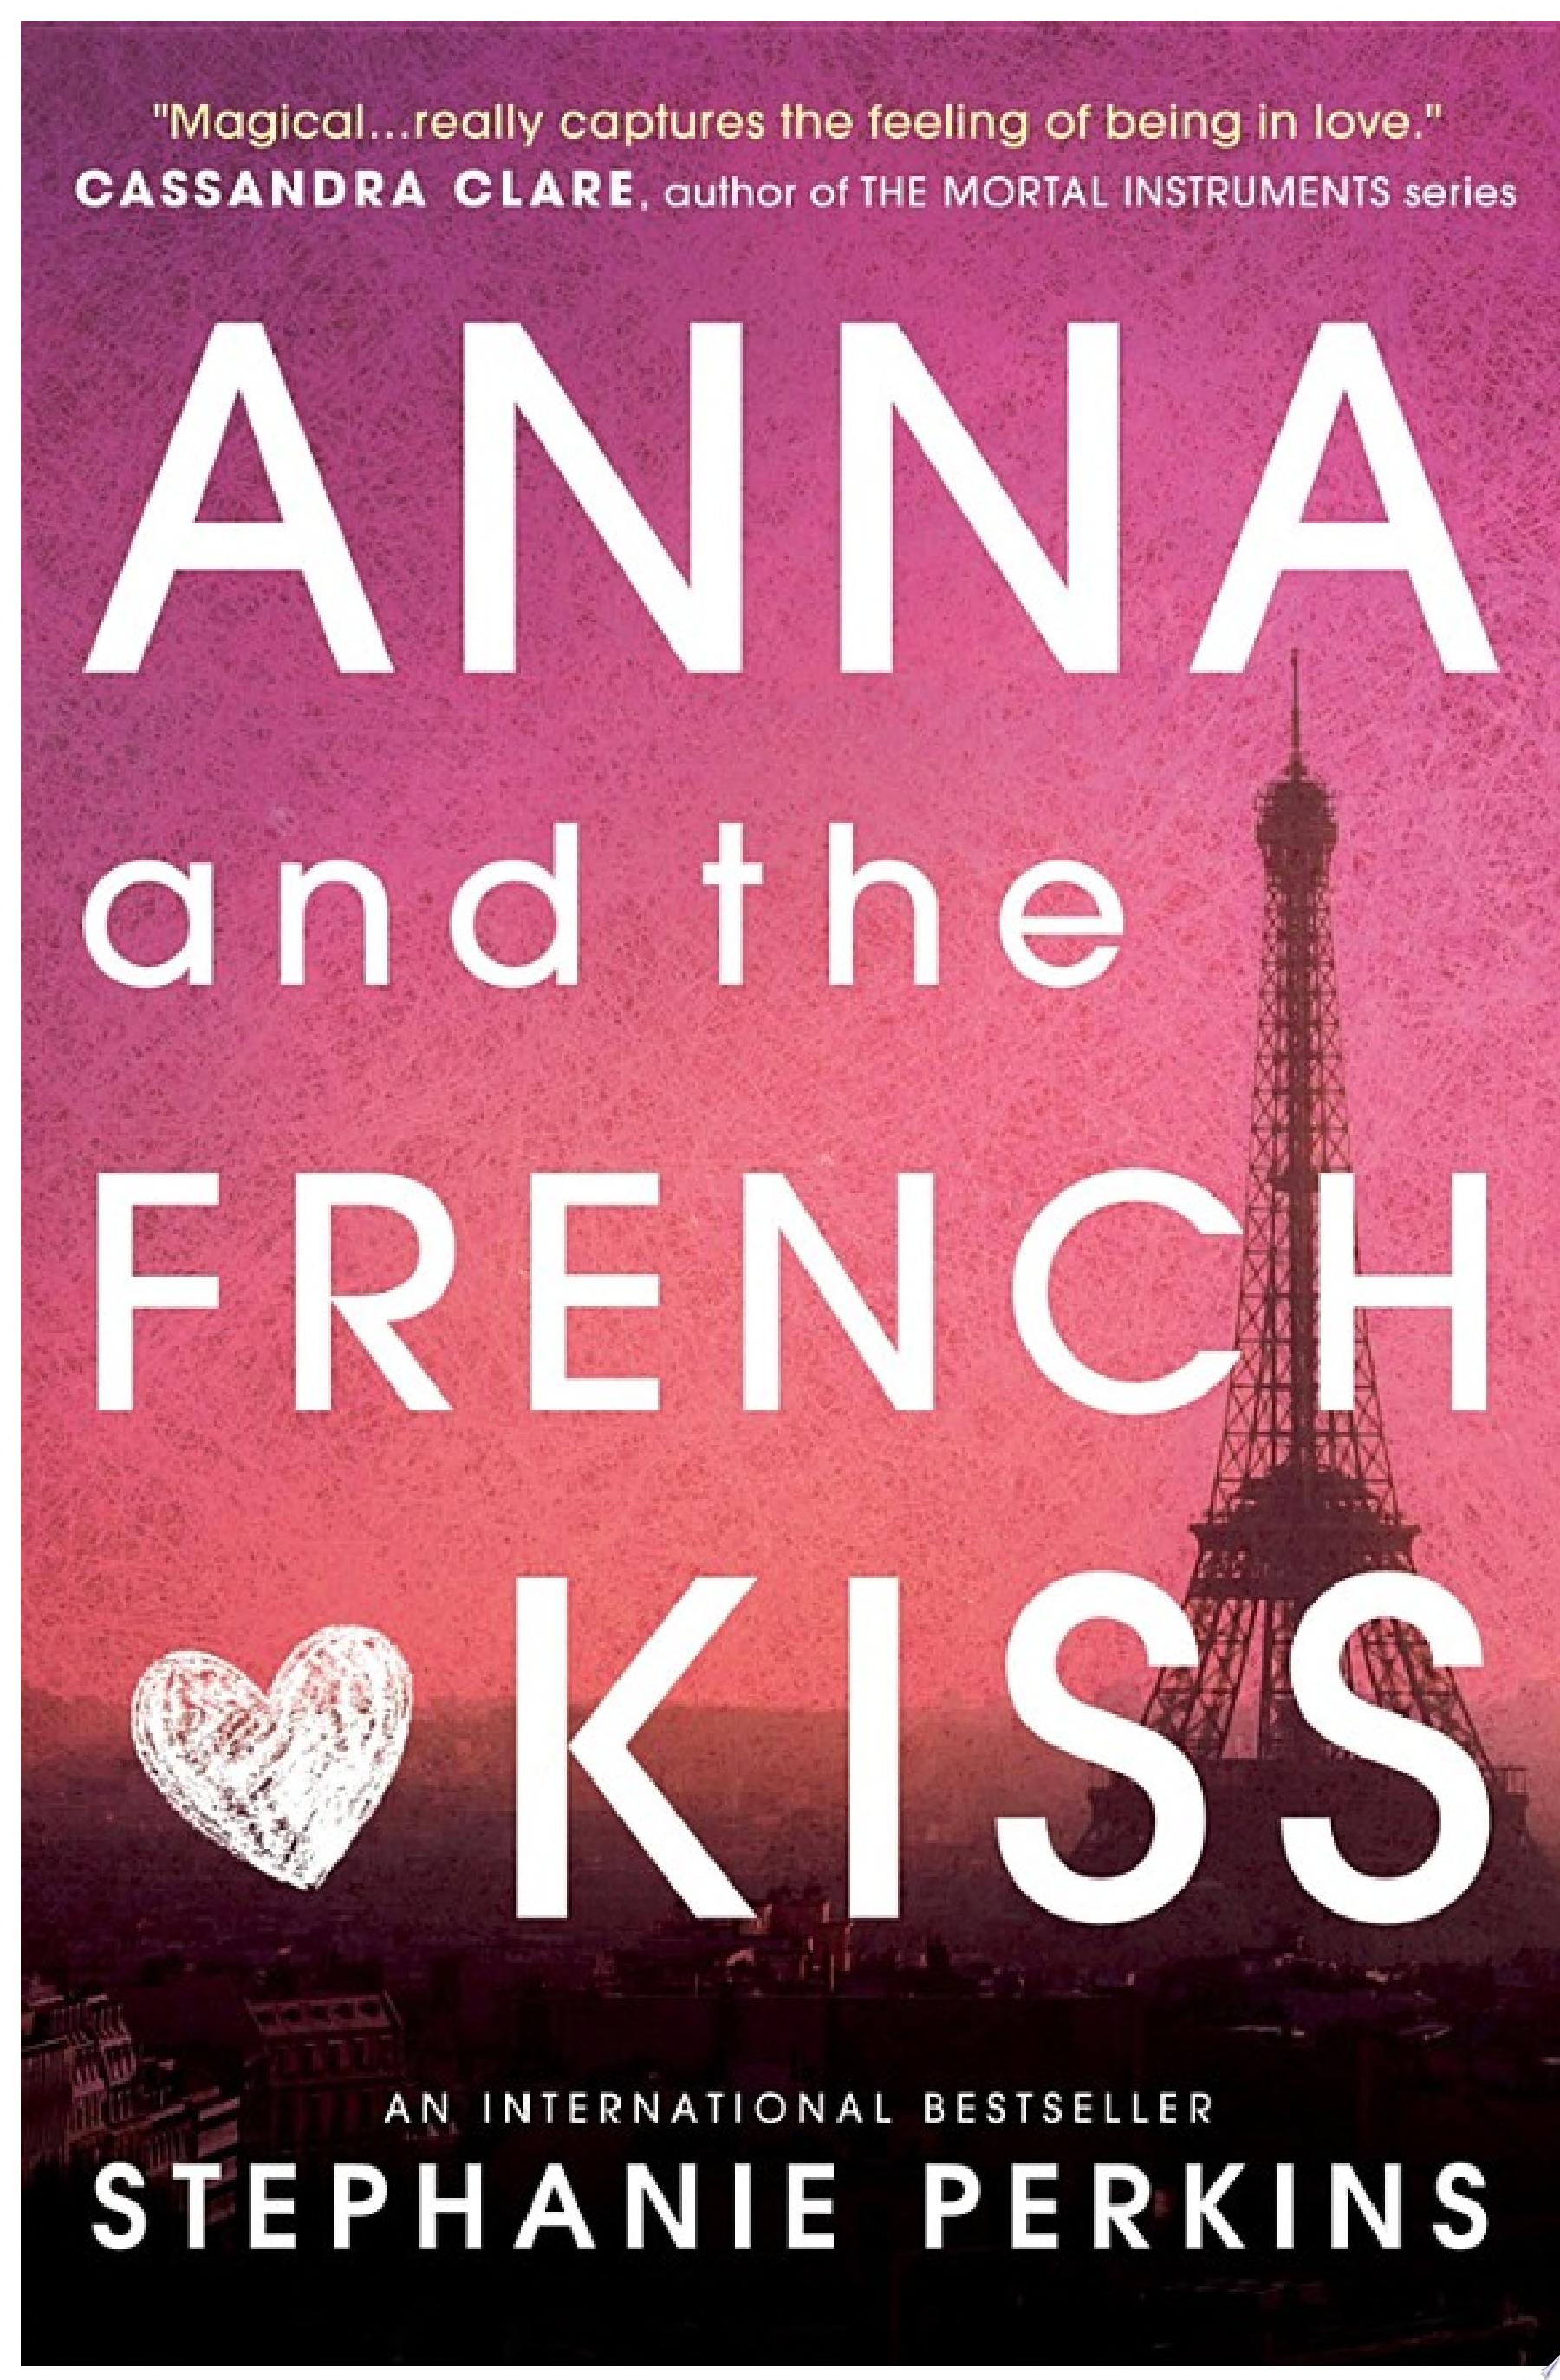 Image for "Anna and the French Kiss"